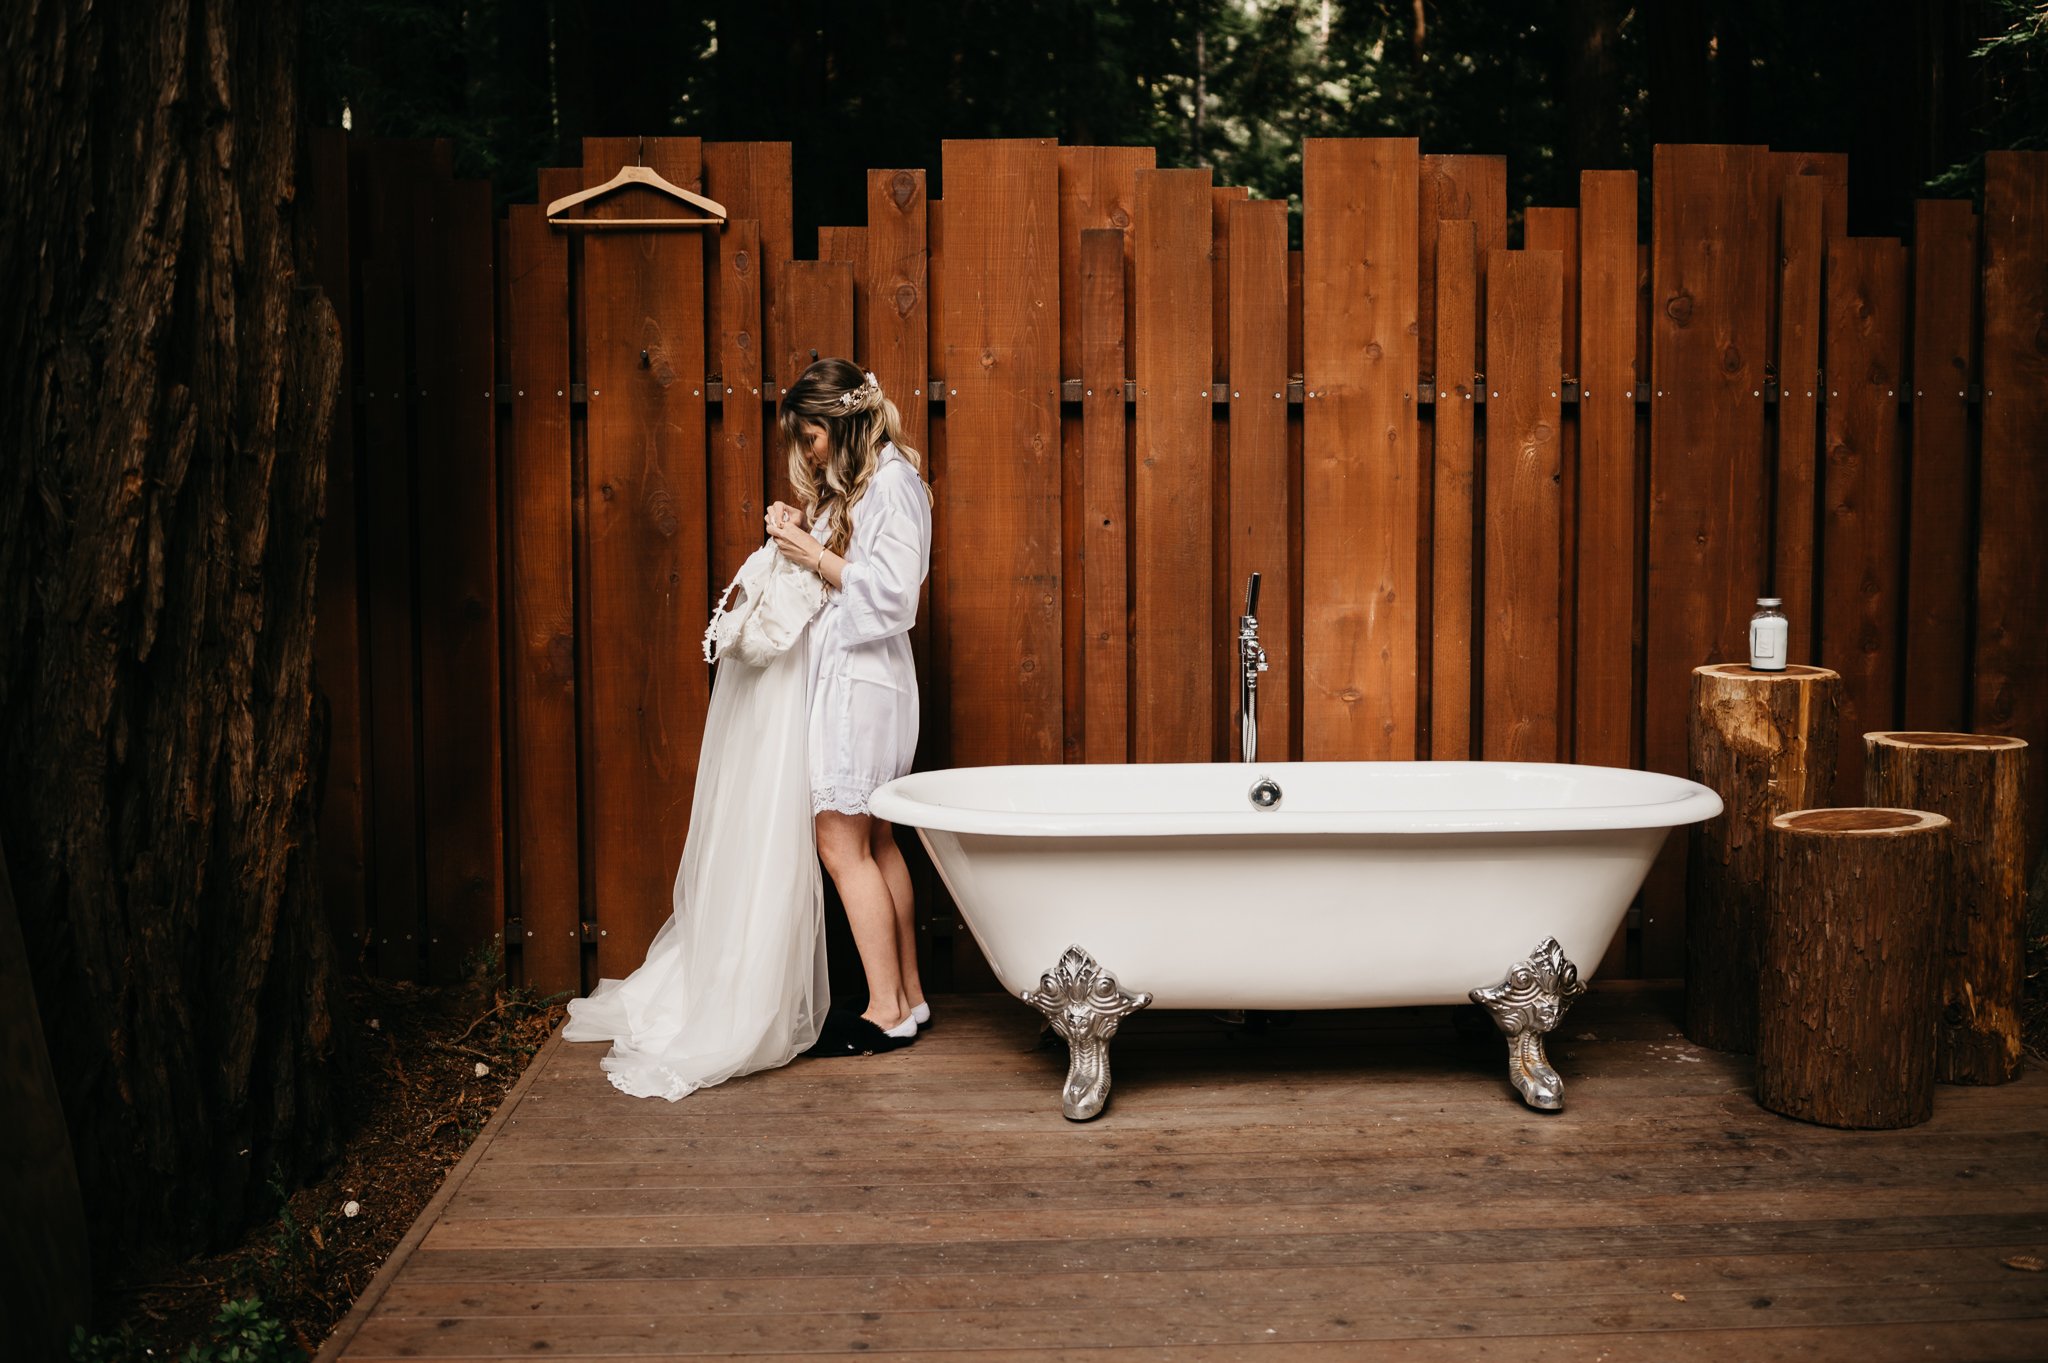 Glen Oaks elopement bride beside and old claw-foot tub adjusting dress dressed in robe and slippers